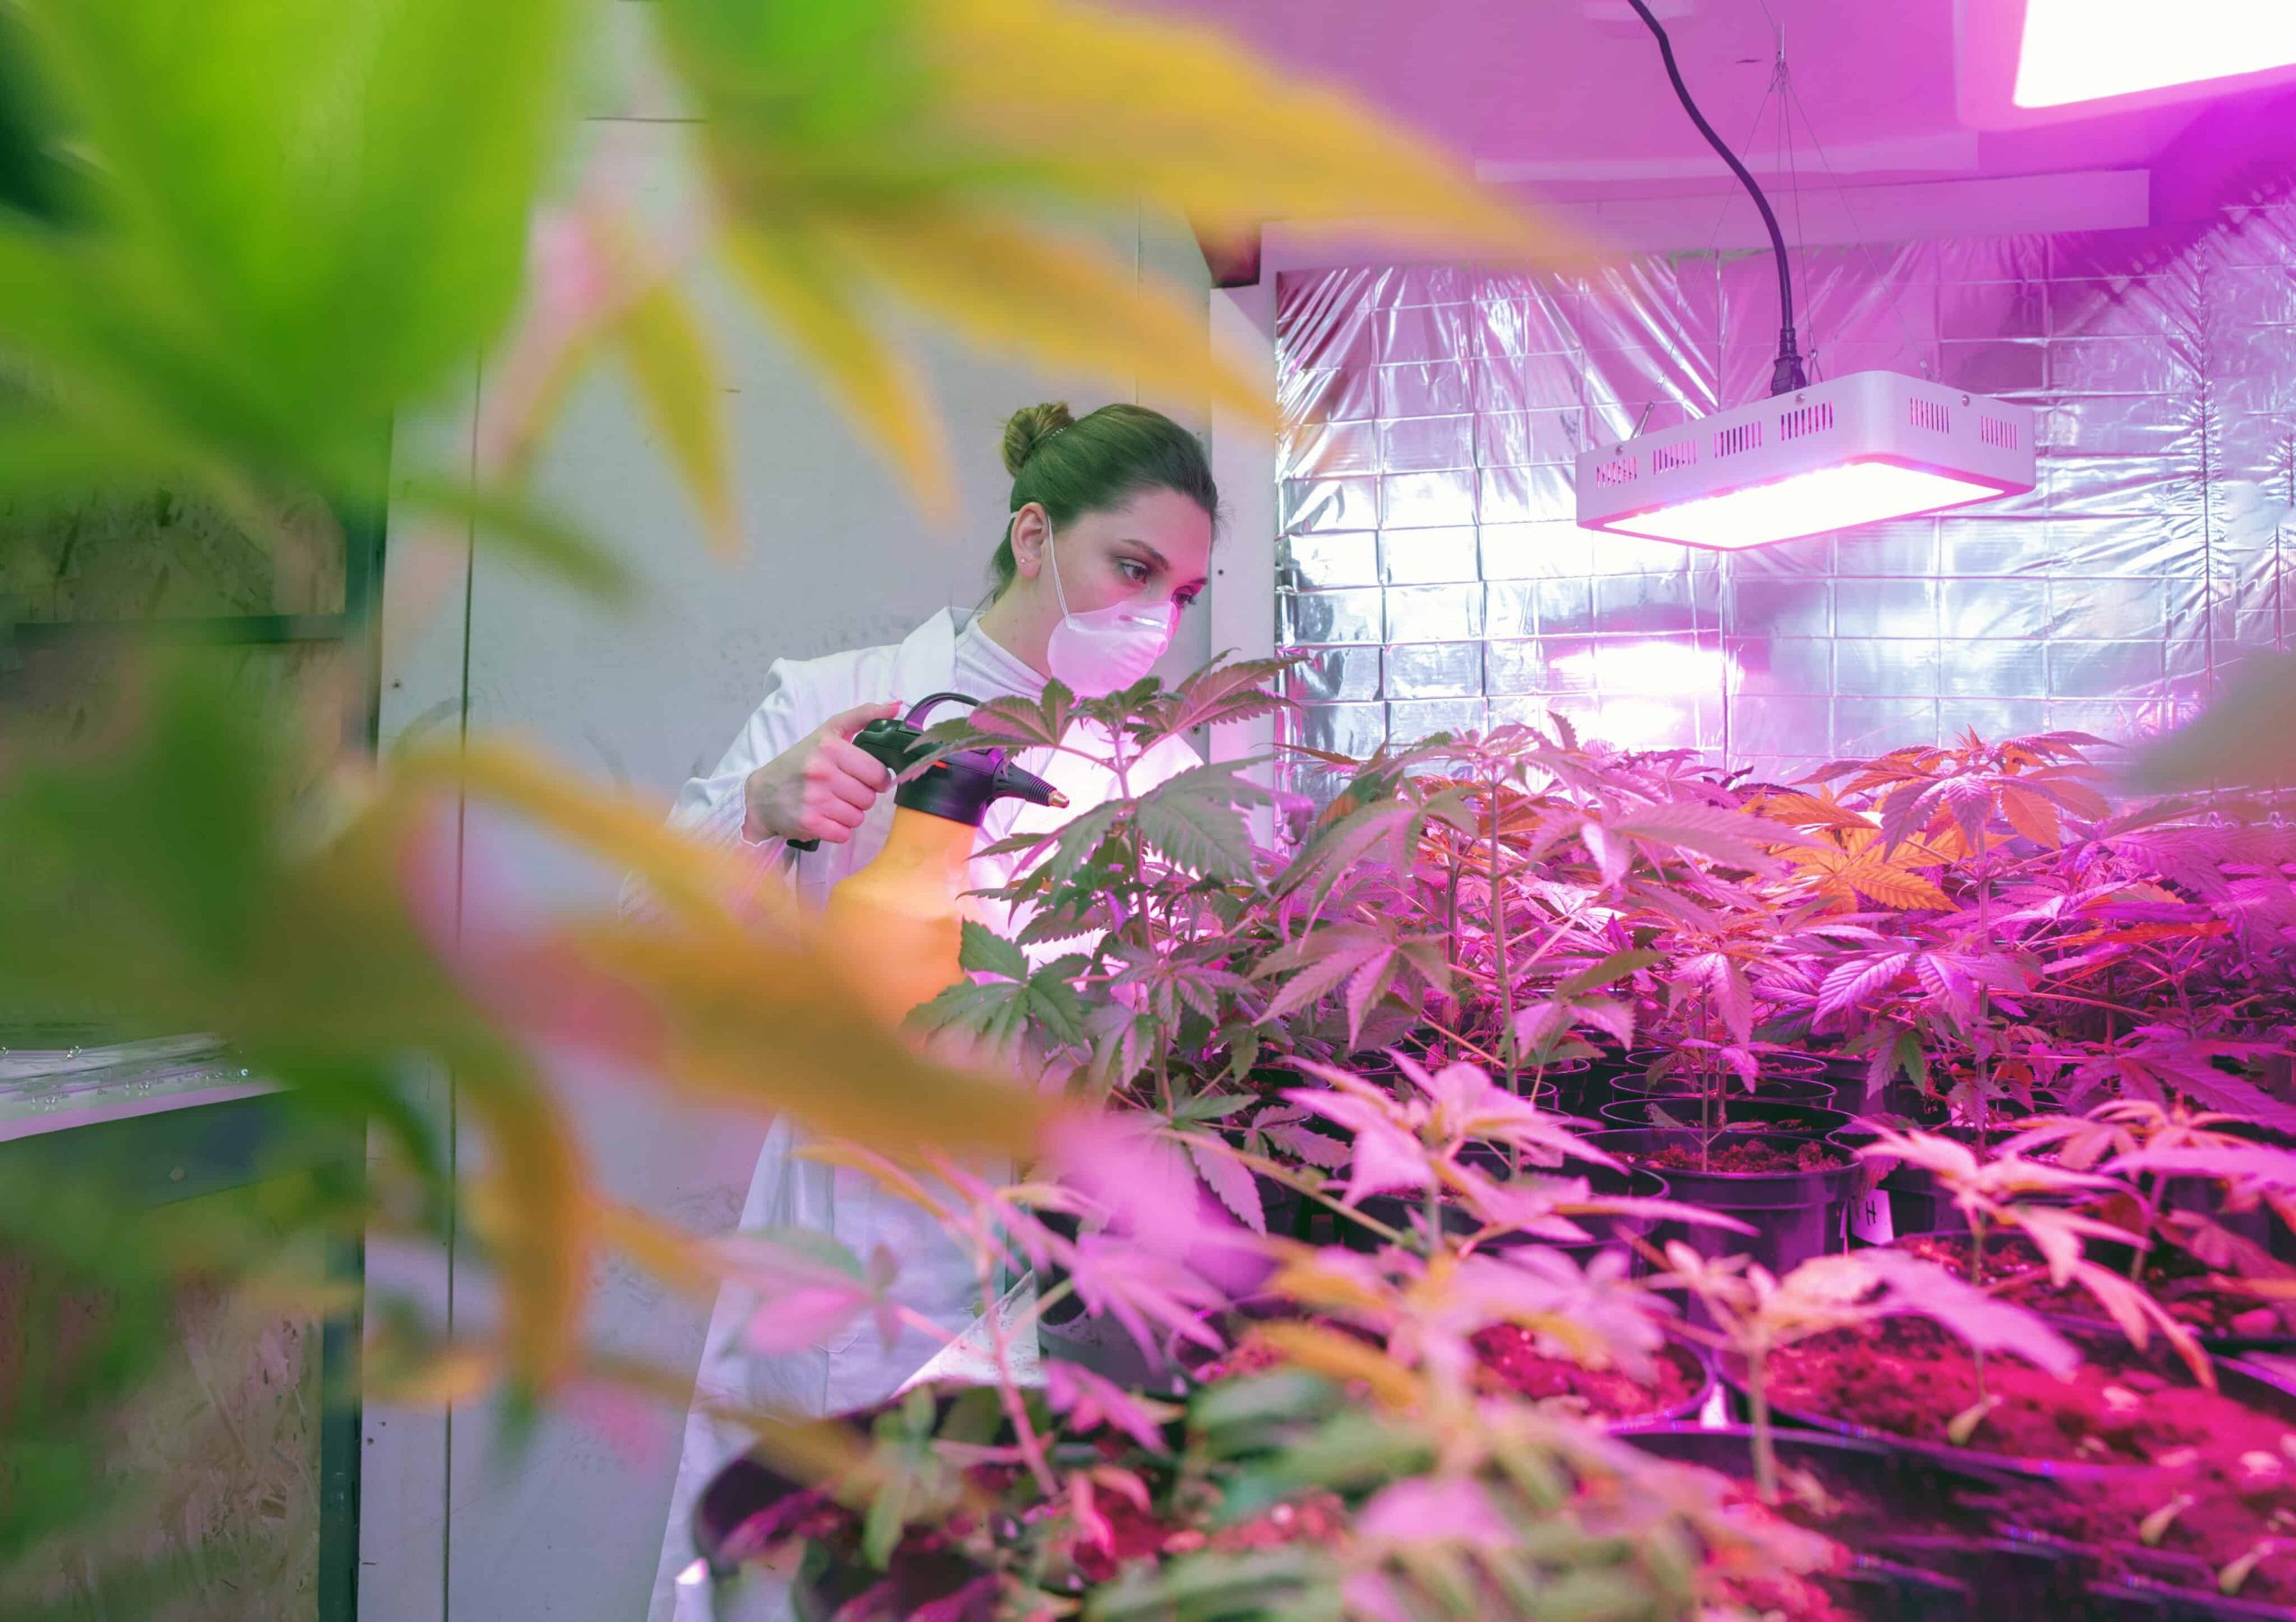 Pennsylvania Lawmakers Will Introduce Bill Allowing Farmers To Grow Medical Pot